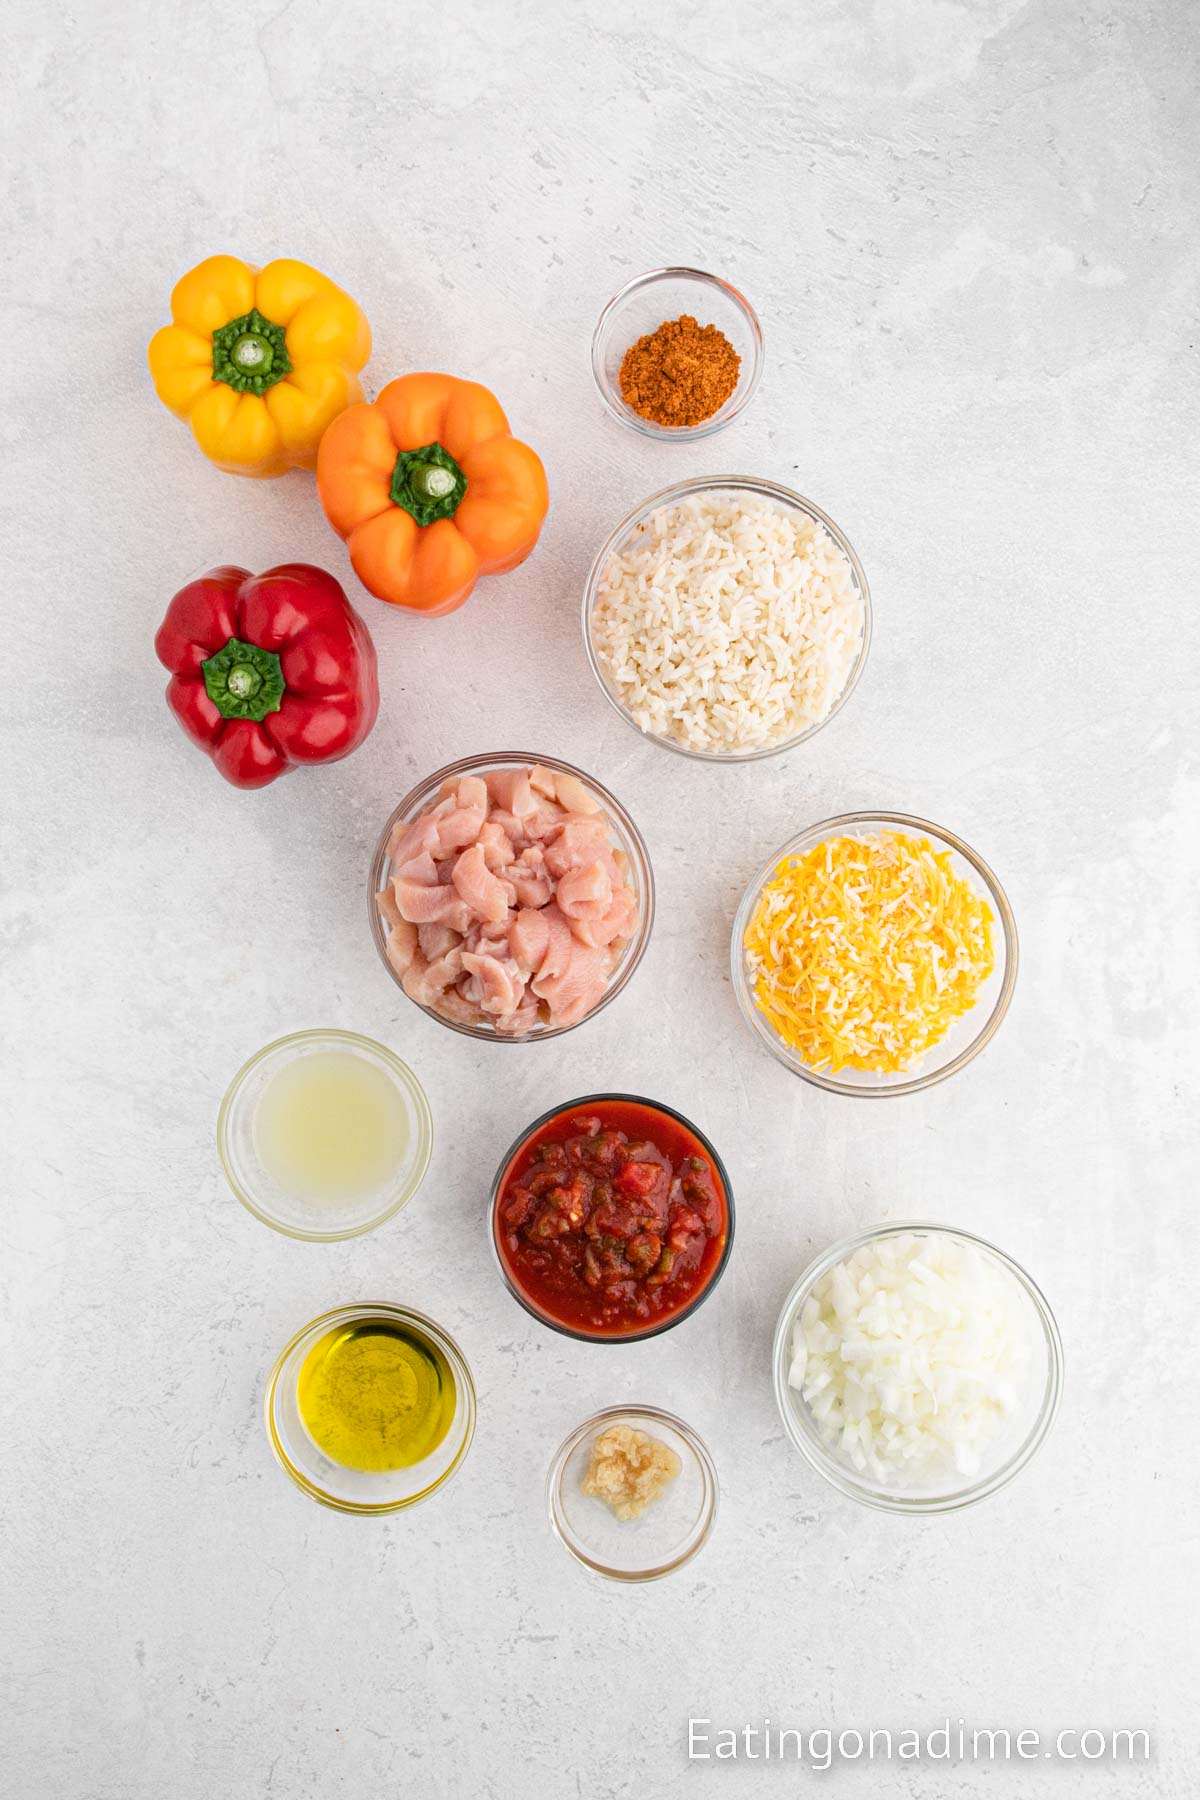 Chicken Stuffed Peppers ingredients - bell peppers, olive oil, onion, minced garlic, chicken breasts, taco seasoning, salsa, white rice, lime, cheese